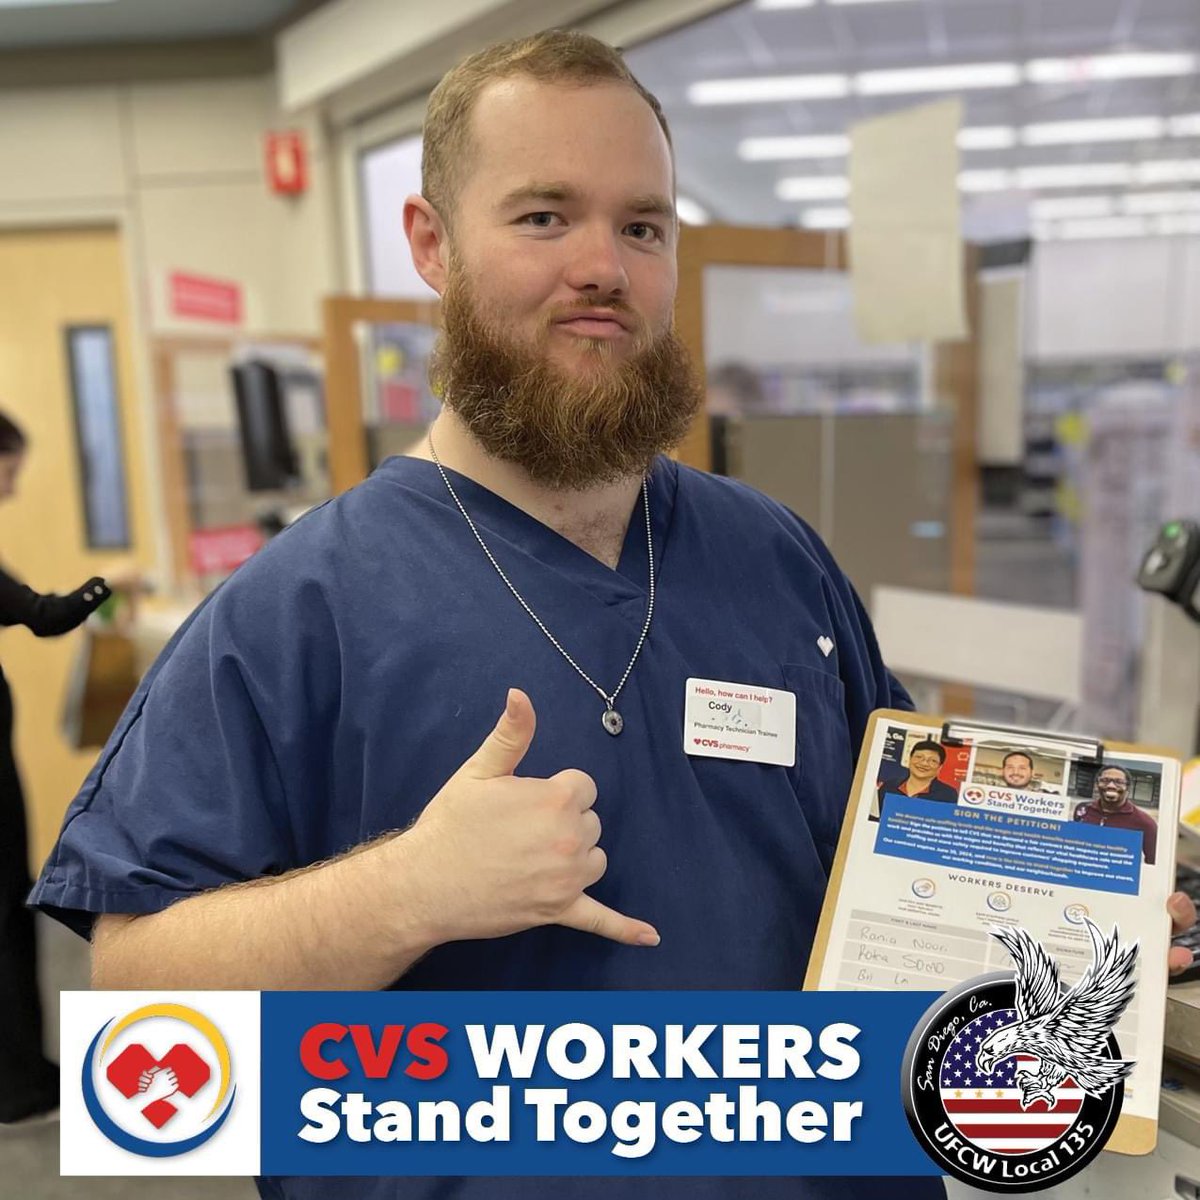 Bargaining at CVS begins next week and our Union Reps are out collecting petition signatures calling for the company to provide safe staffing levels with the wages and benefits needed to raise healthy families. Be like Cody from CVS #3025 in Alpine and sign the petition!